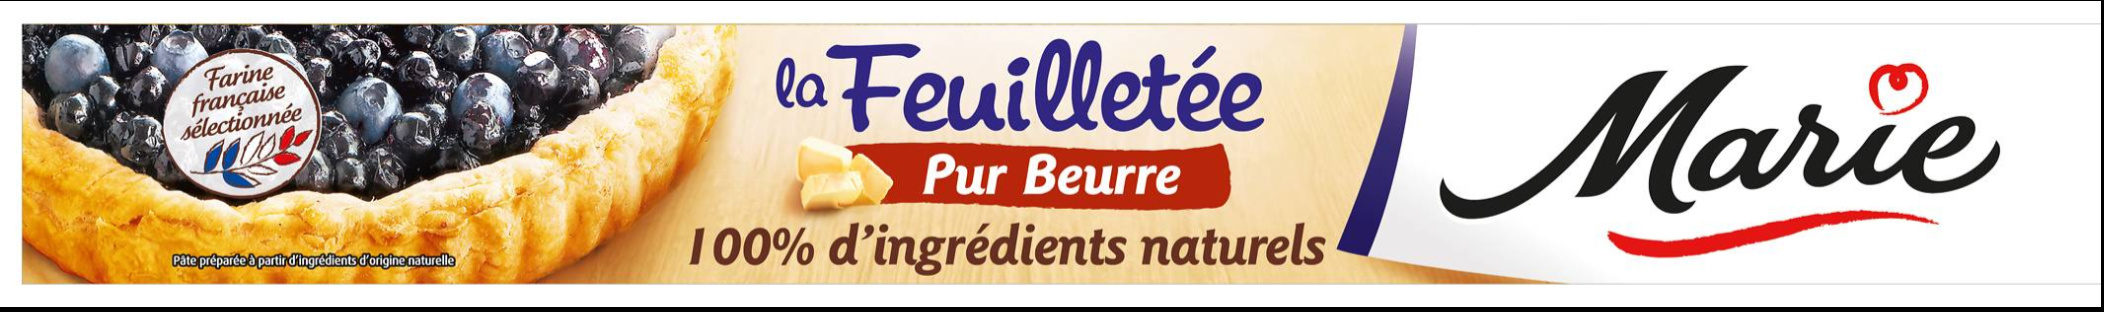 Pate Feuilletee Pur Beurre - Product - fr